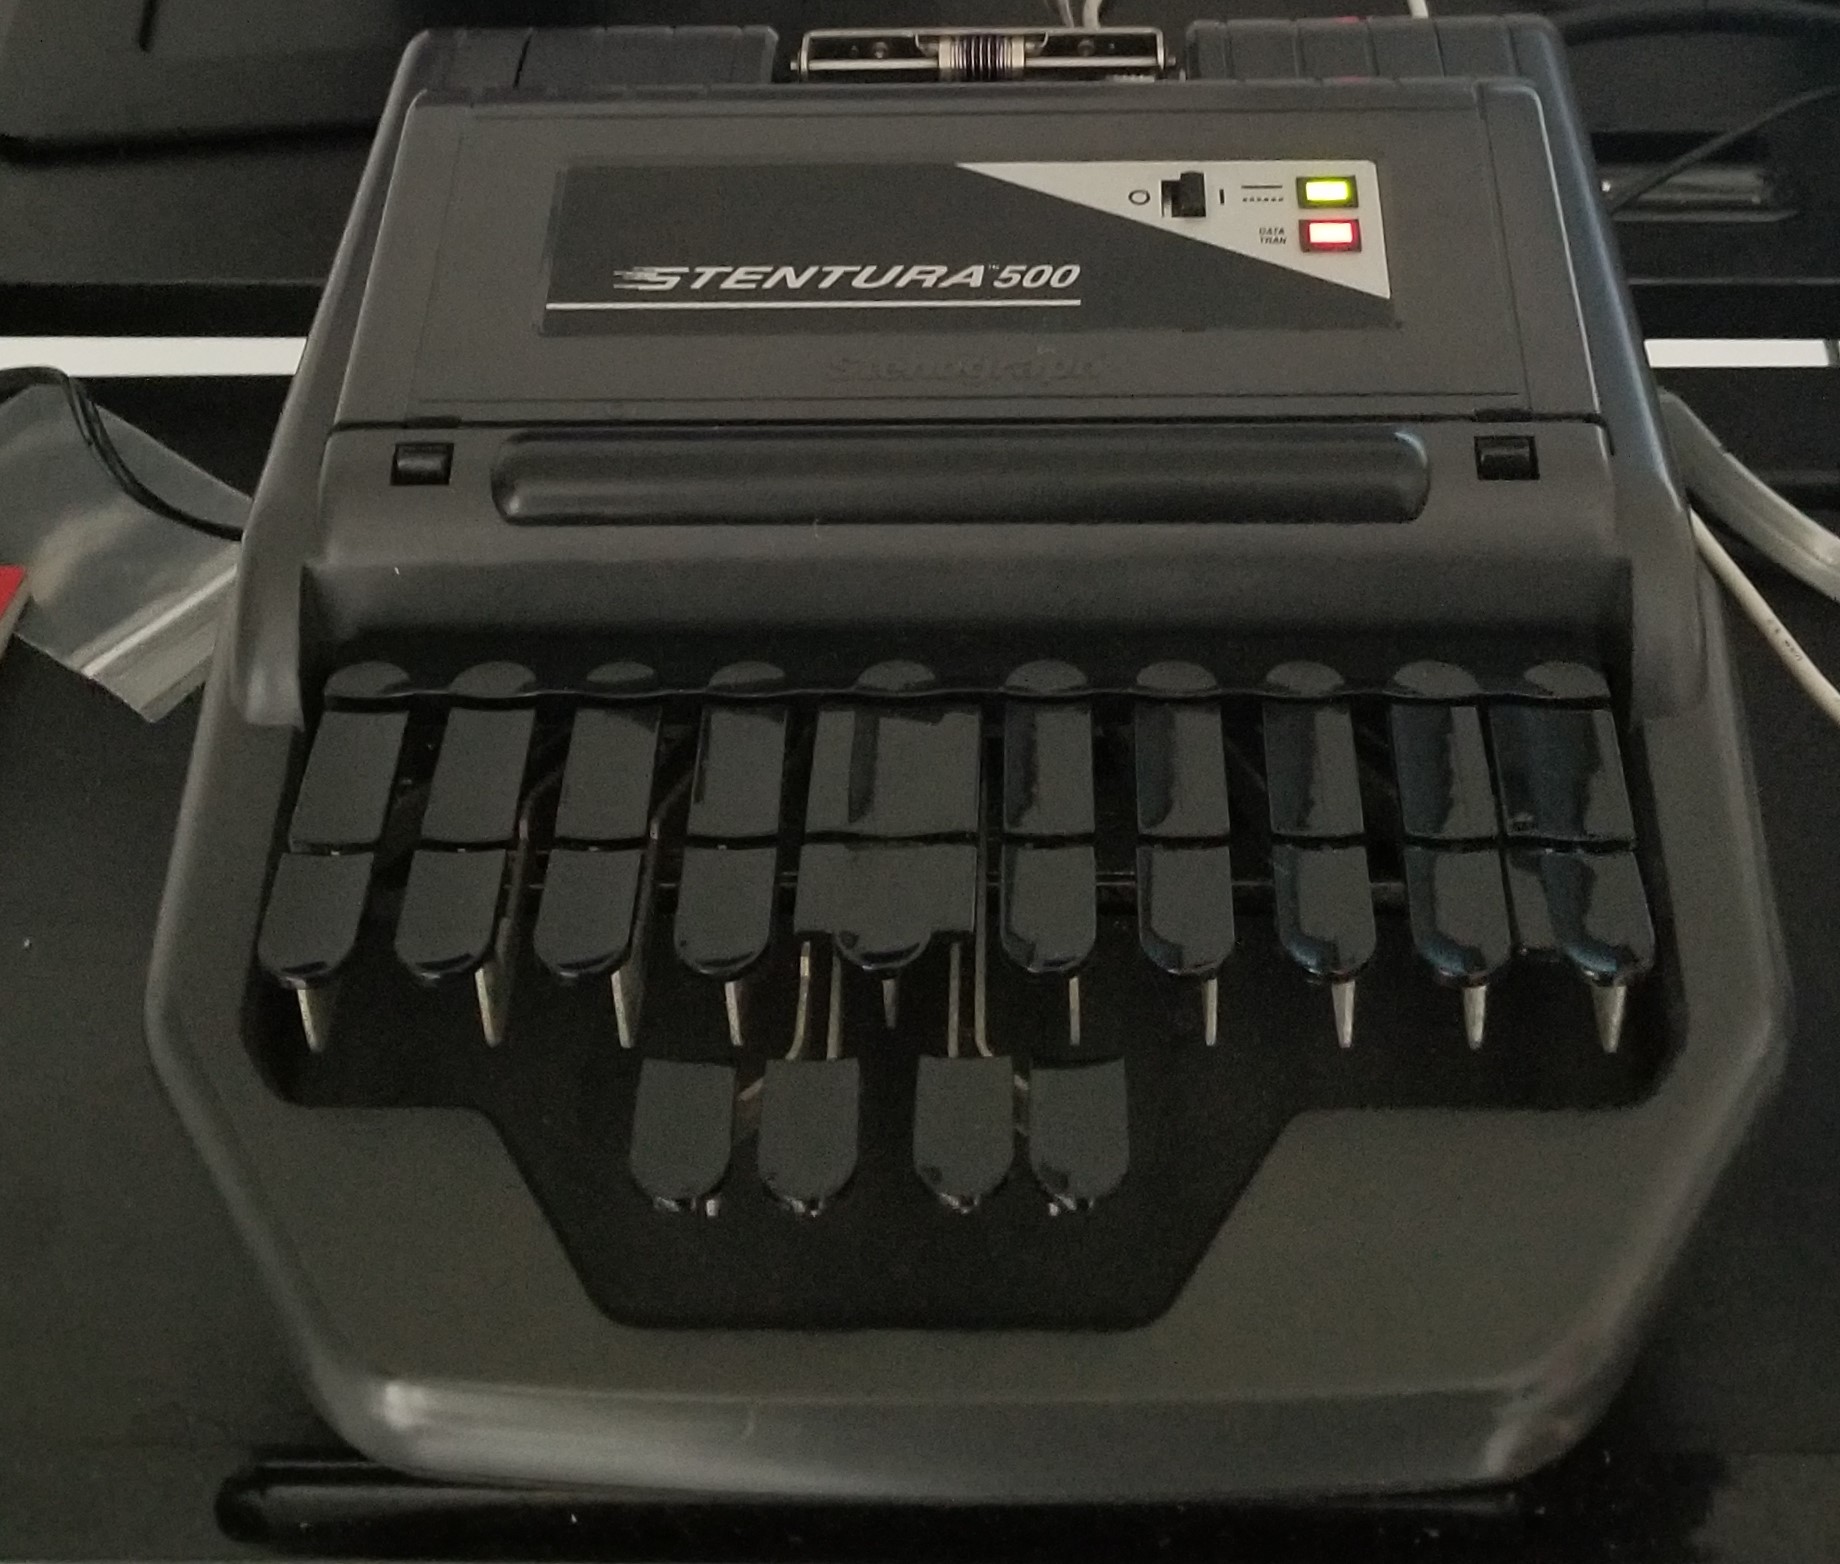 A Stentura 500. This is a fairly old serial port based stenograph. It has the classic keyboard described above in a level configuration, and a paper tape dispenser.